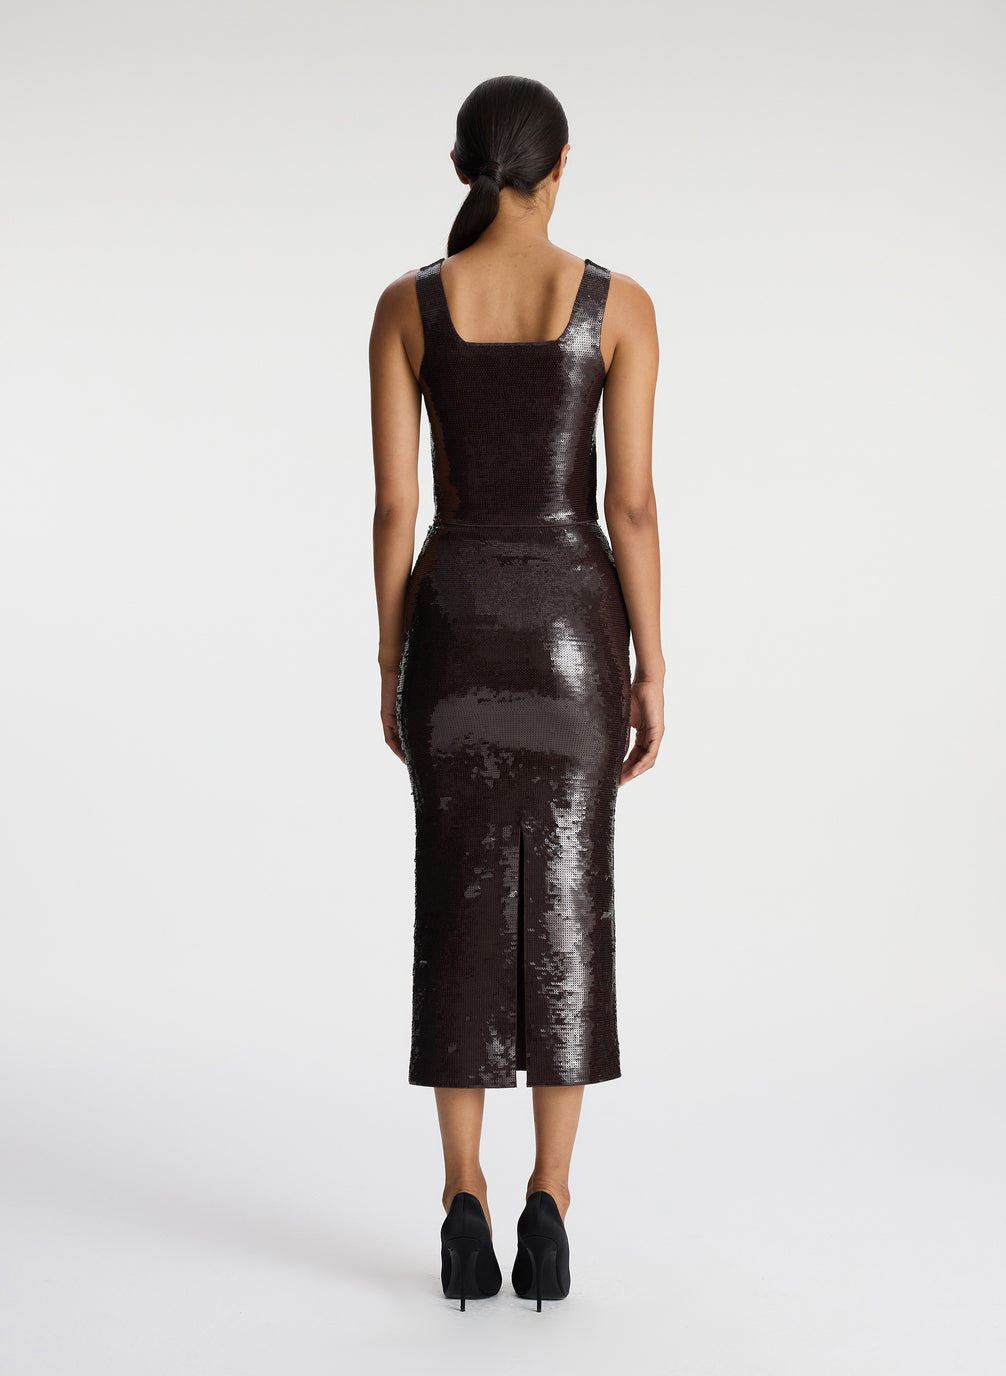 back view of woman wearing brown sequined sleeveless top and matching brown sequined midi skirt